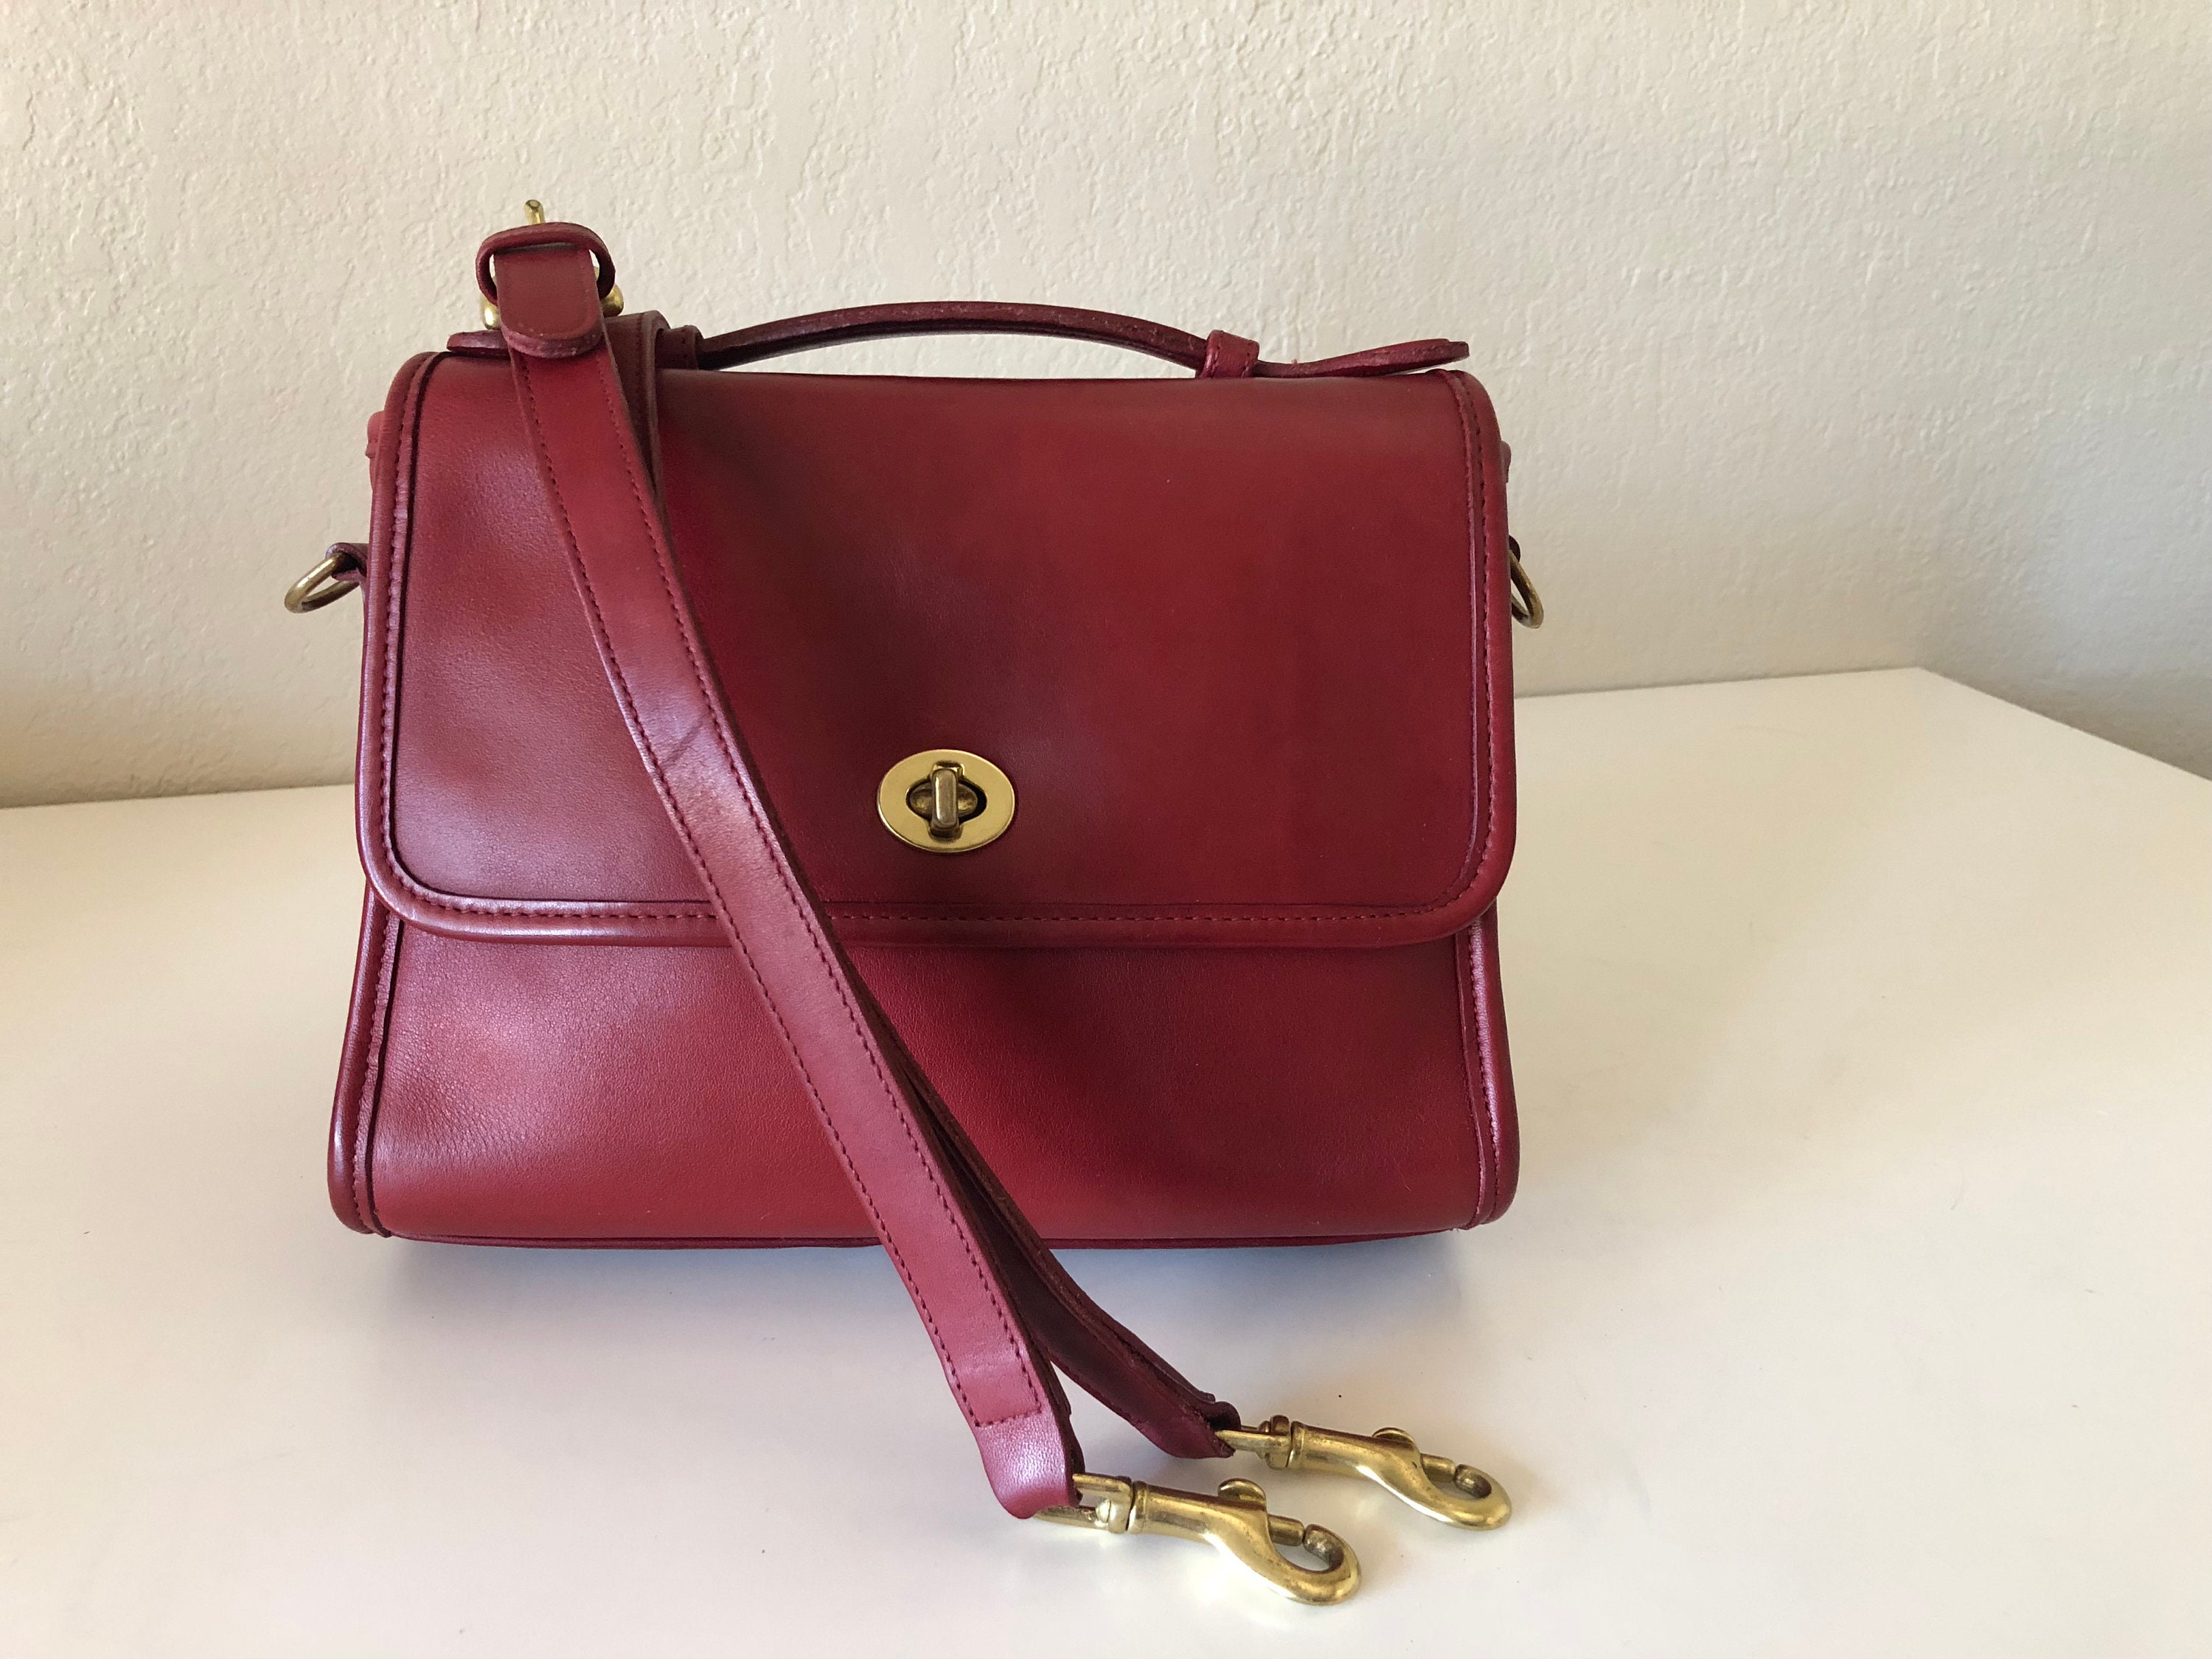 Where to Find + How to Restore a Vintage Coach Court Bag